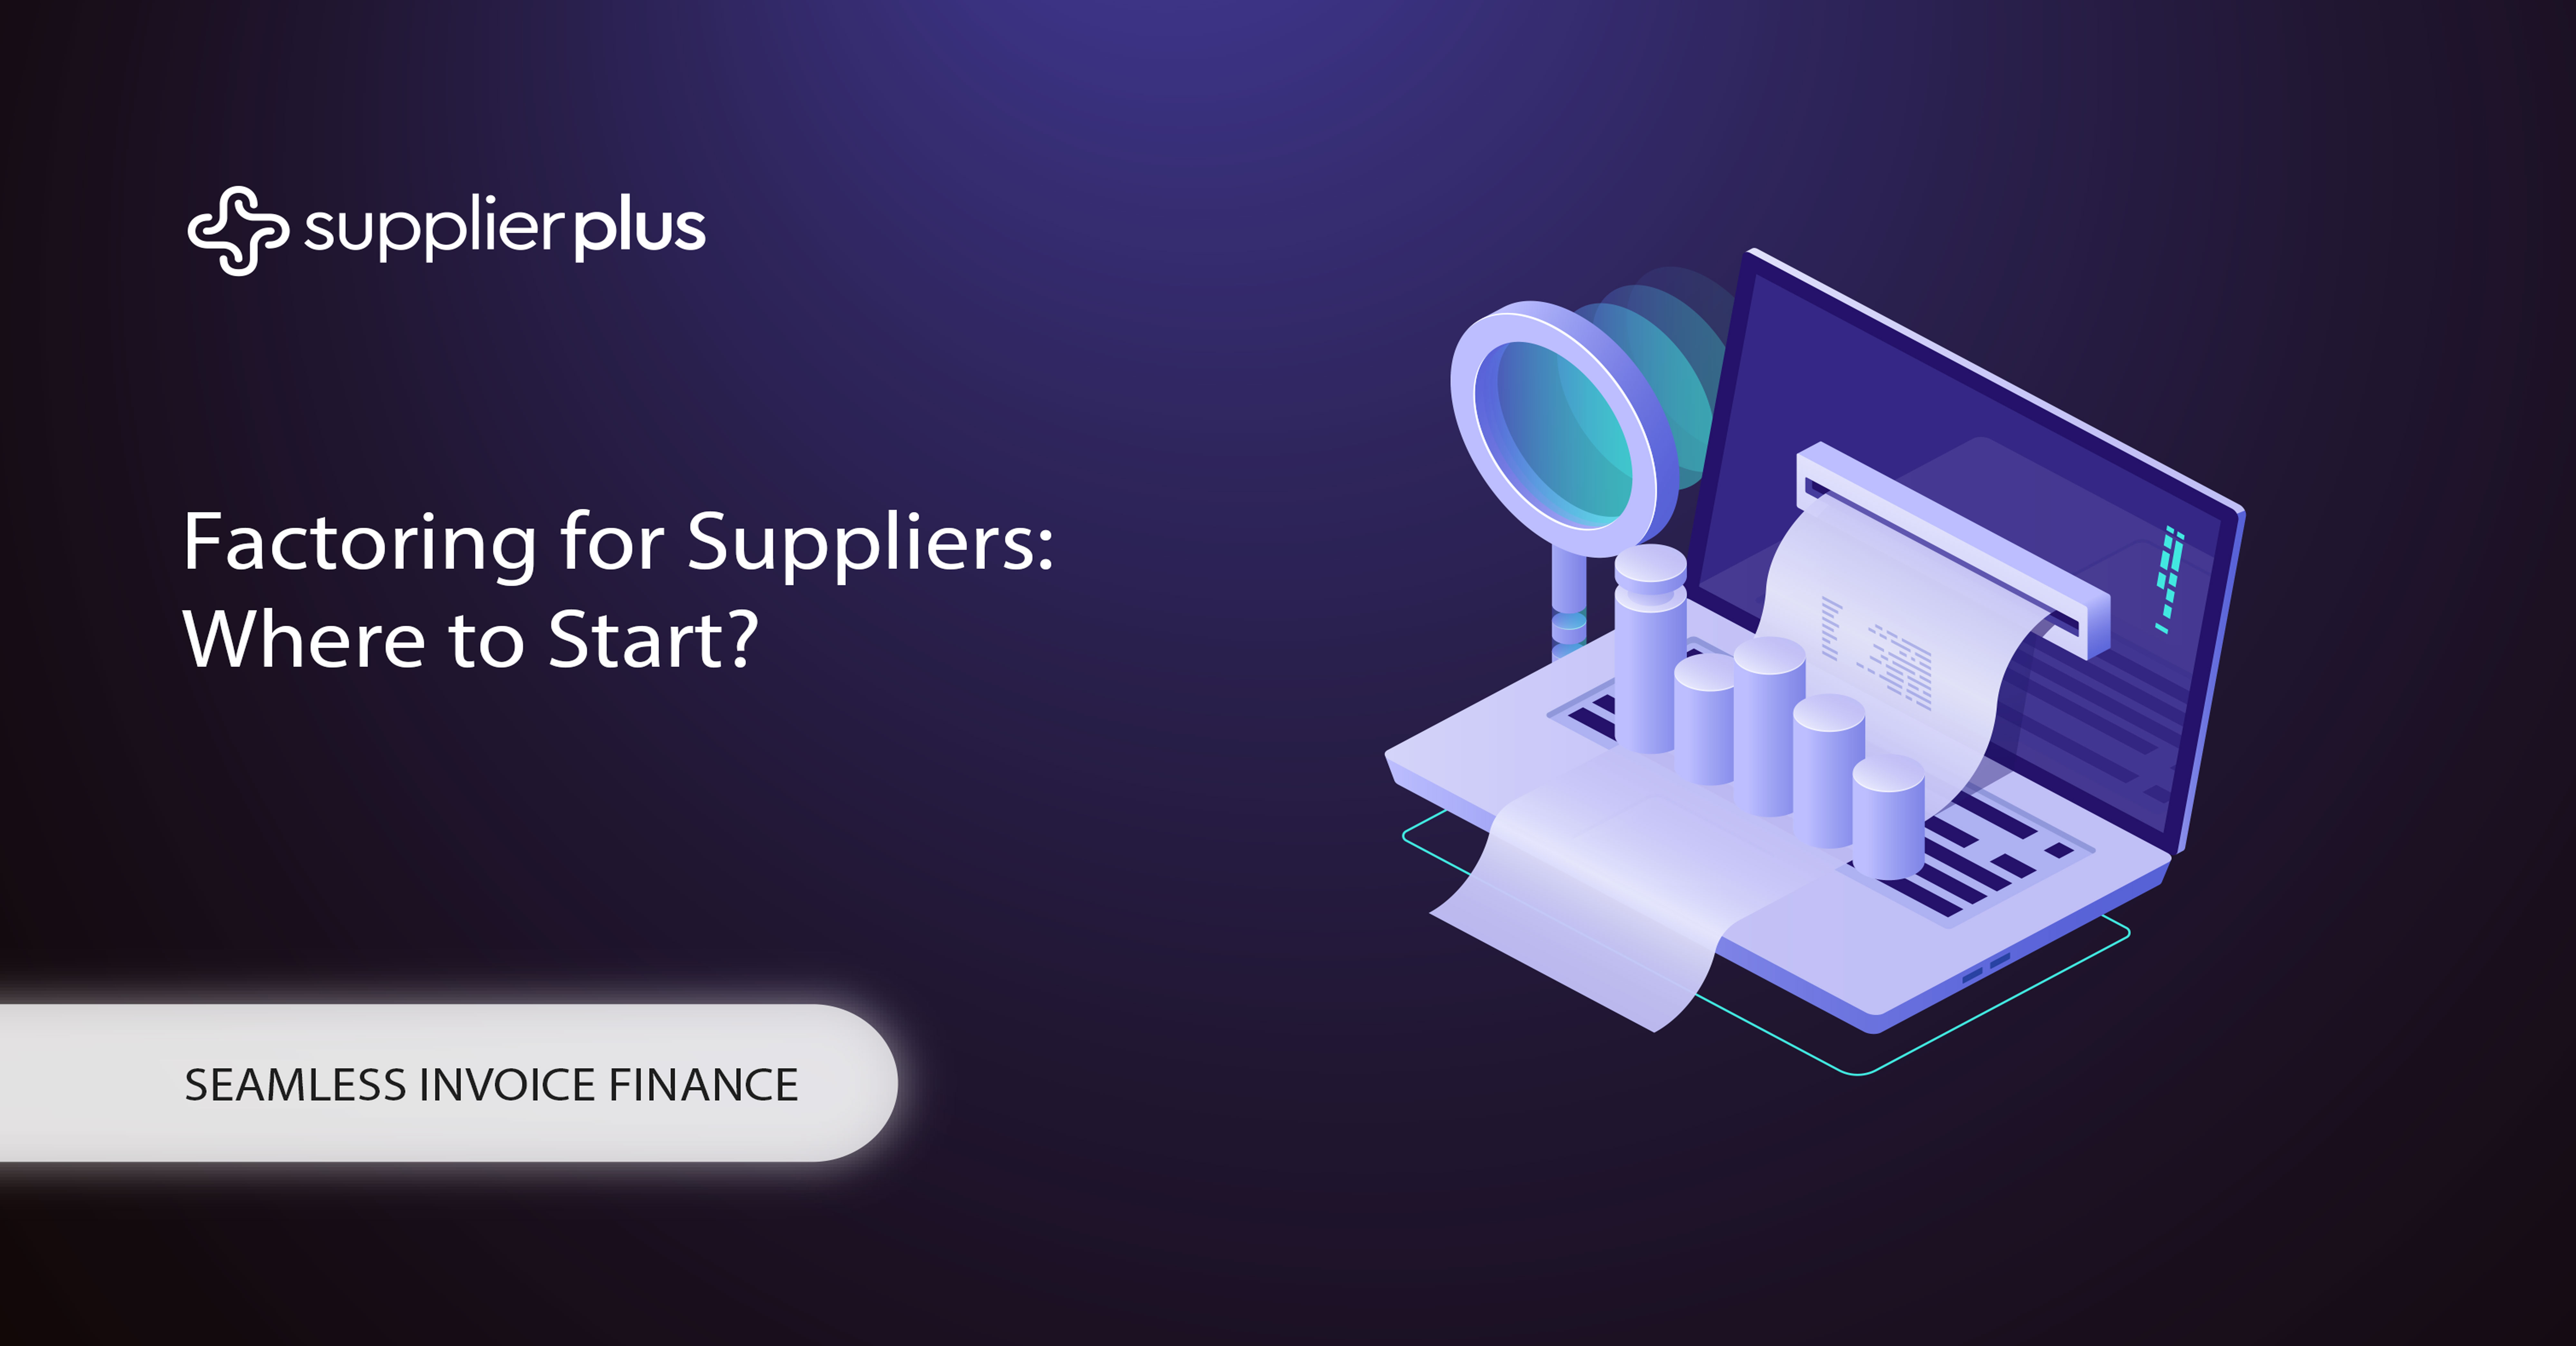 Factoring for Suppliers: Where to Start?